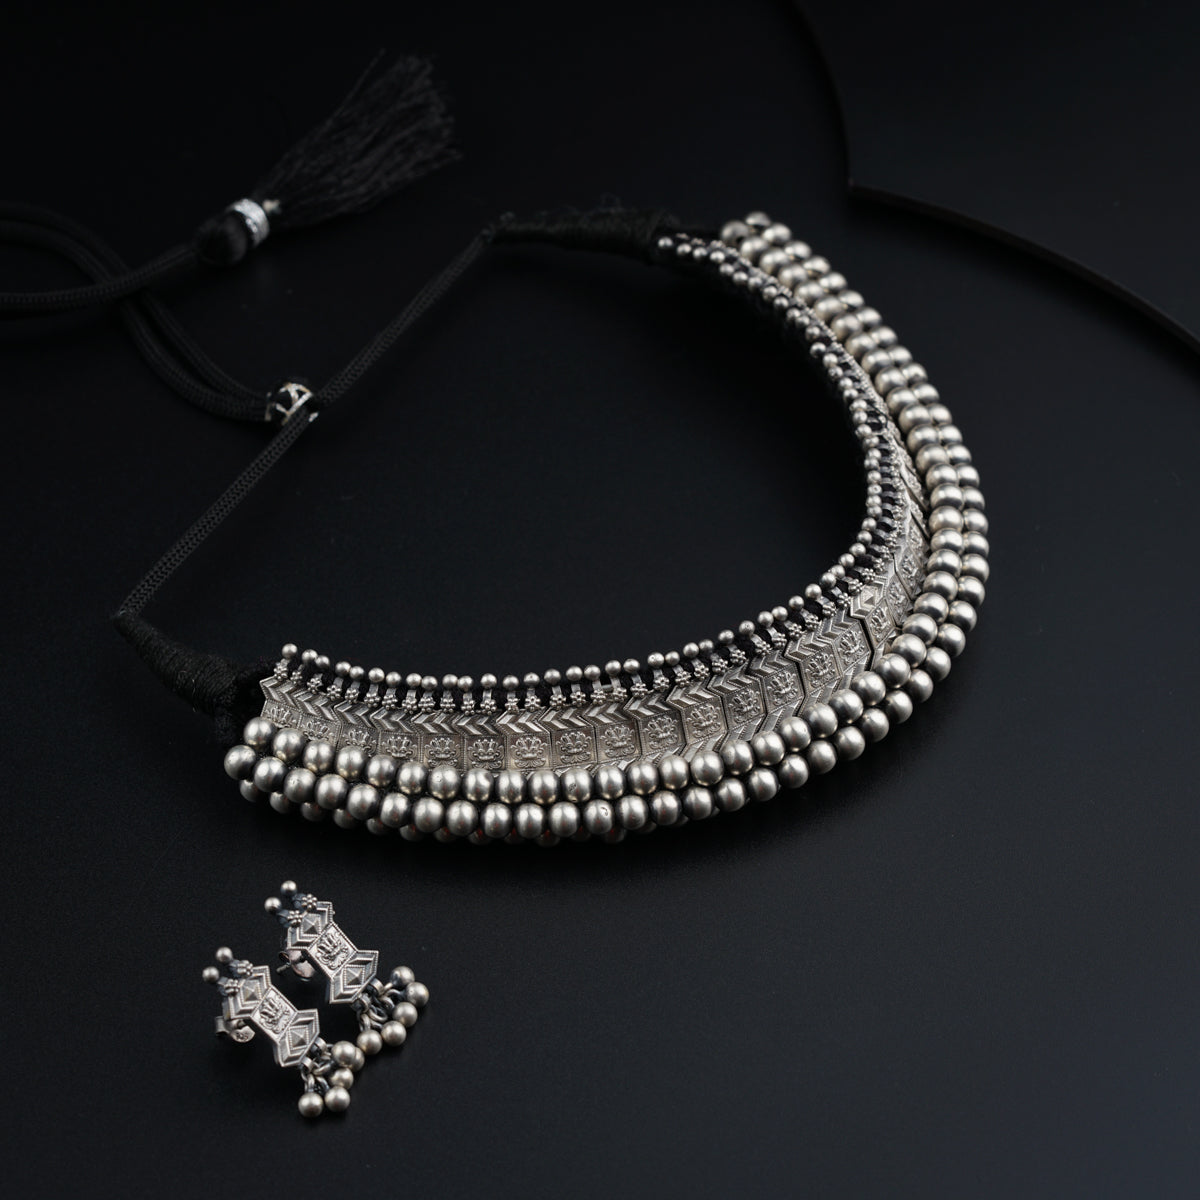 a silver necklace with a cross charm on a black background